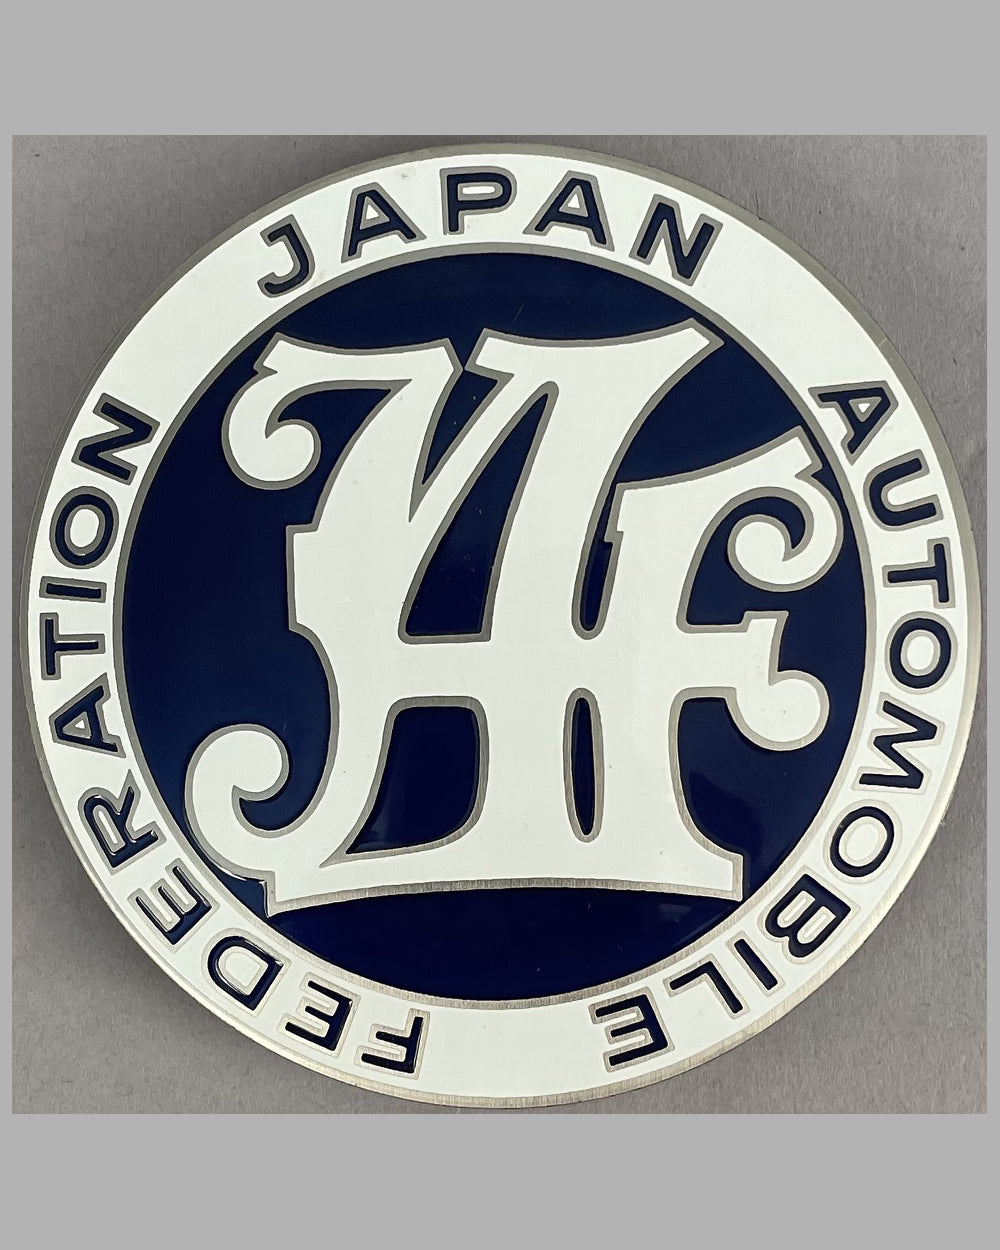 Japan Automobile Federation grill badge, 1960's